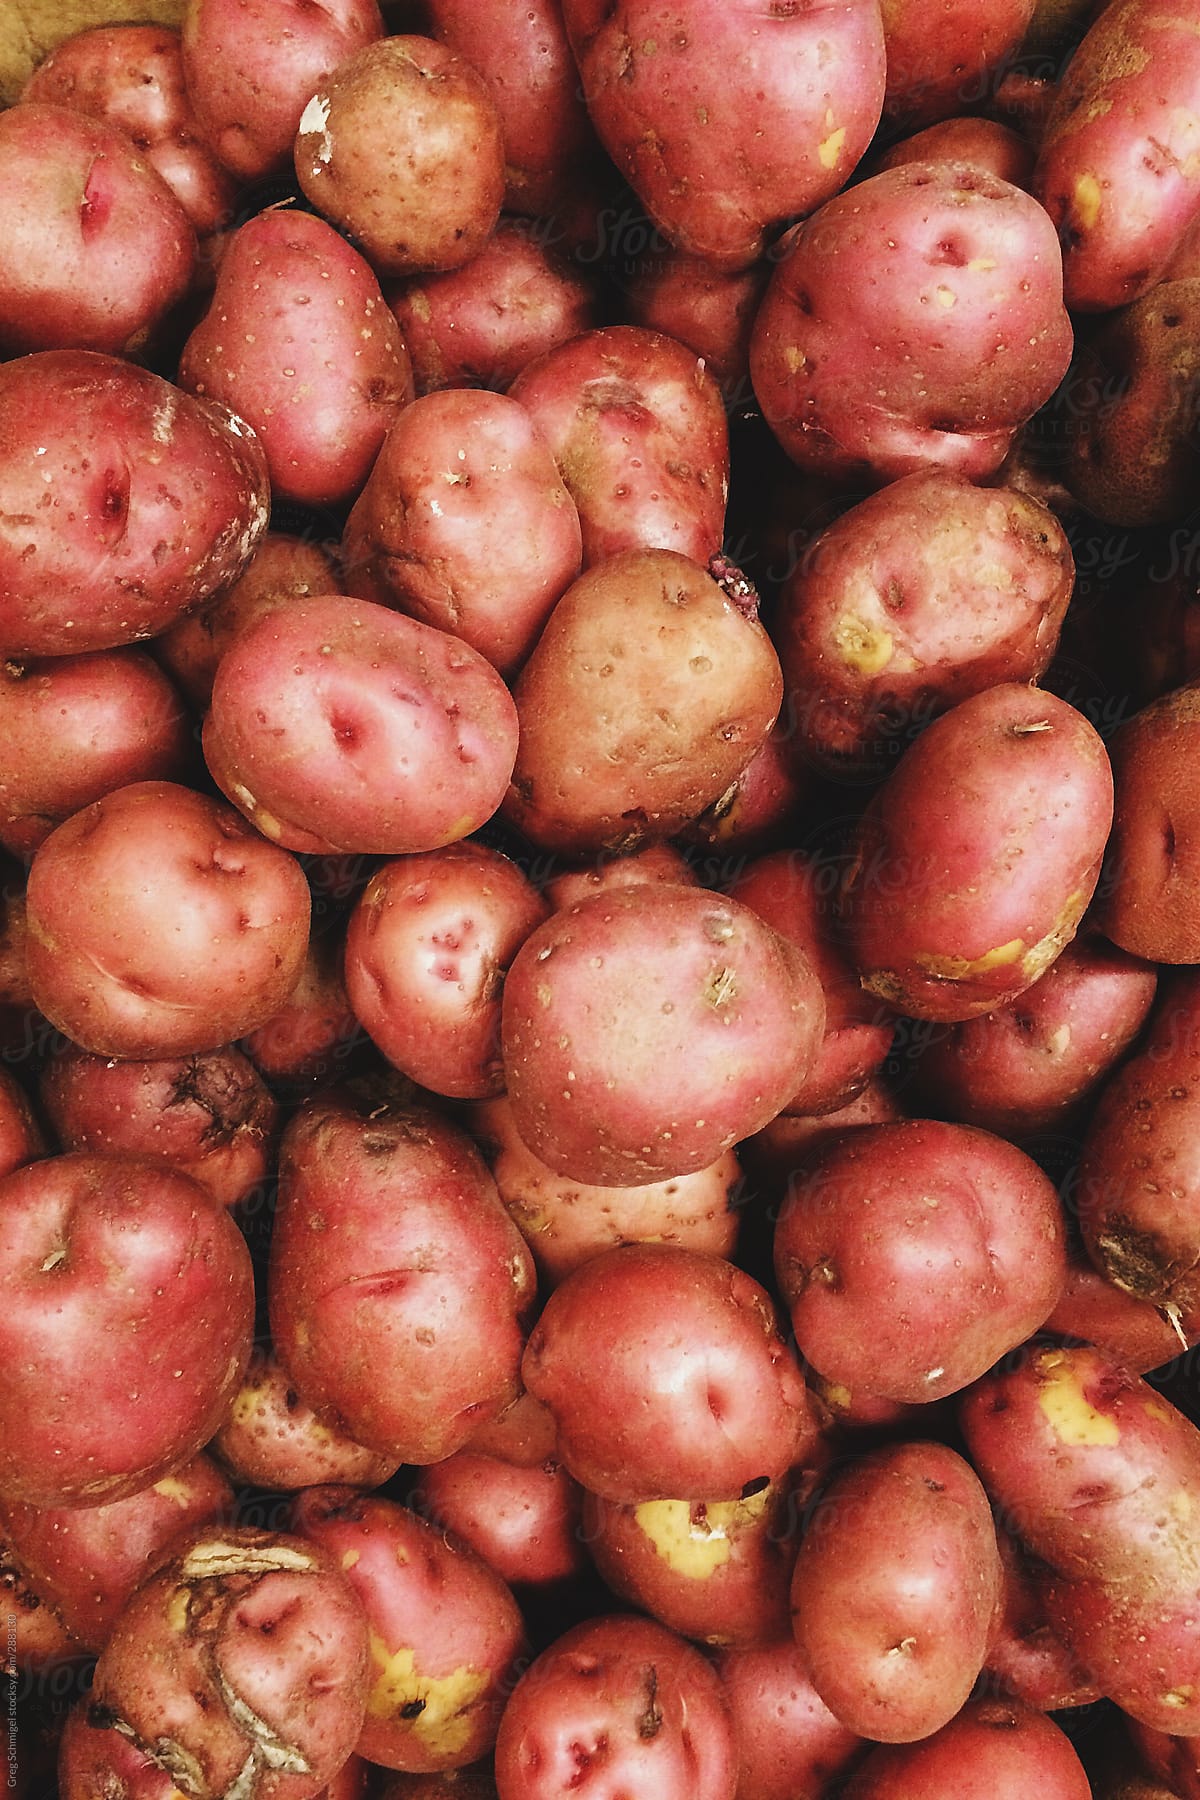 Potatoes for sale at a farmer's market